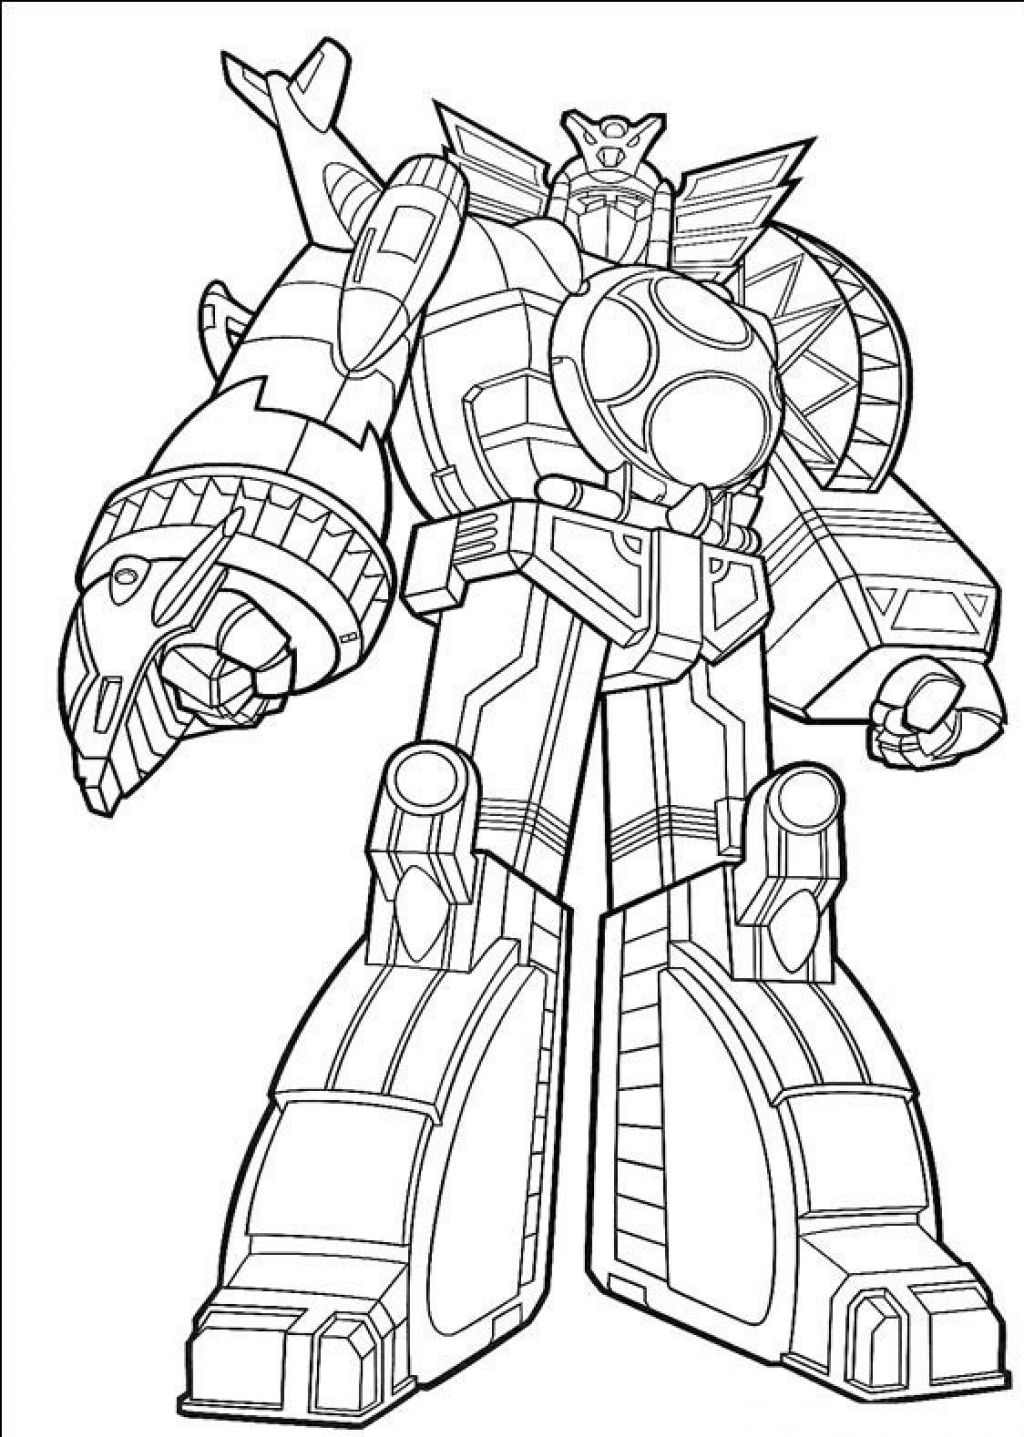 Power Rangers Rpm Coloring Pages Rangers Paintings Search Result At Paintingvalley